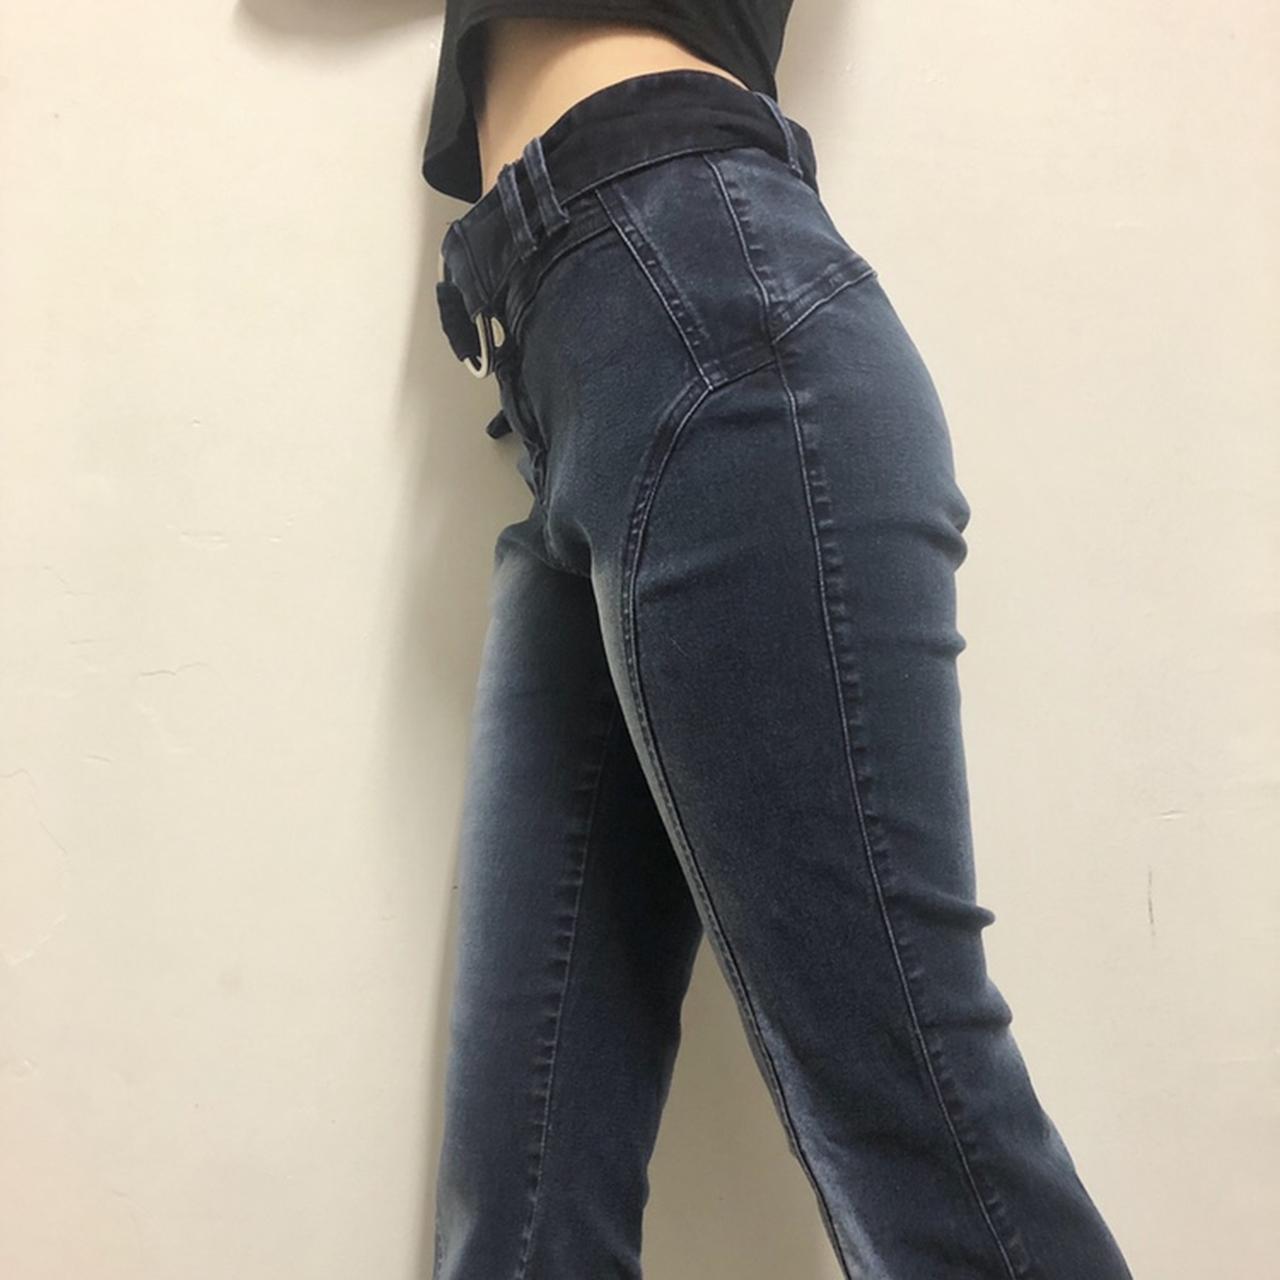 Early 2000s low rise flare jeans with matching o... - Depop